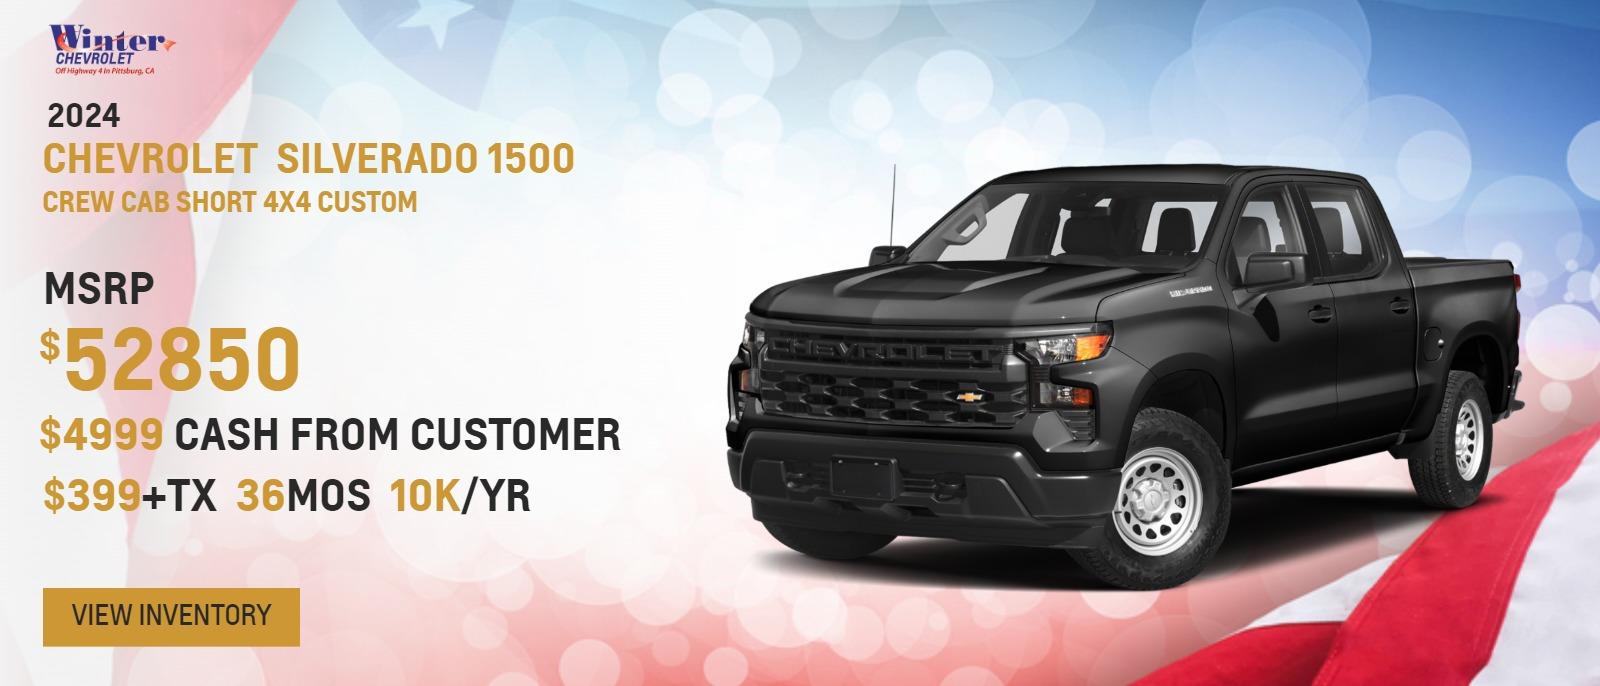 2024 Silverado Crew Cab Short 4x4 Custom
MSRP $52850
$4999 cash from customer
$399+tx
36mos
10k/yr

Disclosure: Lease based on New 2024 Chevy Silverado Crew Cab 4x4 Custom (RZ177636, RZ194609). MSRP of $52,850 - $8,499 due at lease signing including $4999 from customer, $2500 Chevy Loyalty Rebate, $1000 Chevy Incremental CCR Rebate, $399 first monthly payment, plus taxes, titles, license and documentary service fees. No security deposit required. Option to purchase at lease end $35,409.50. Lessee is responsible for $.25 per mile over 10,000 miles/year, excess wear, and a $395 termination fee. Offer Expires 06/03/2024.